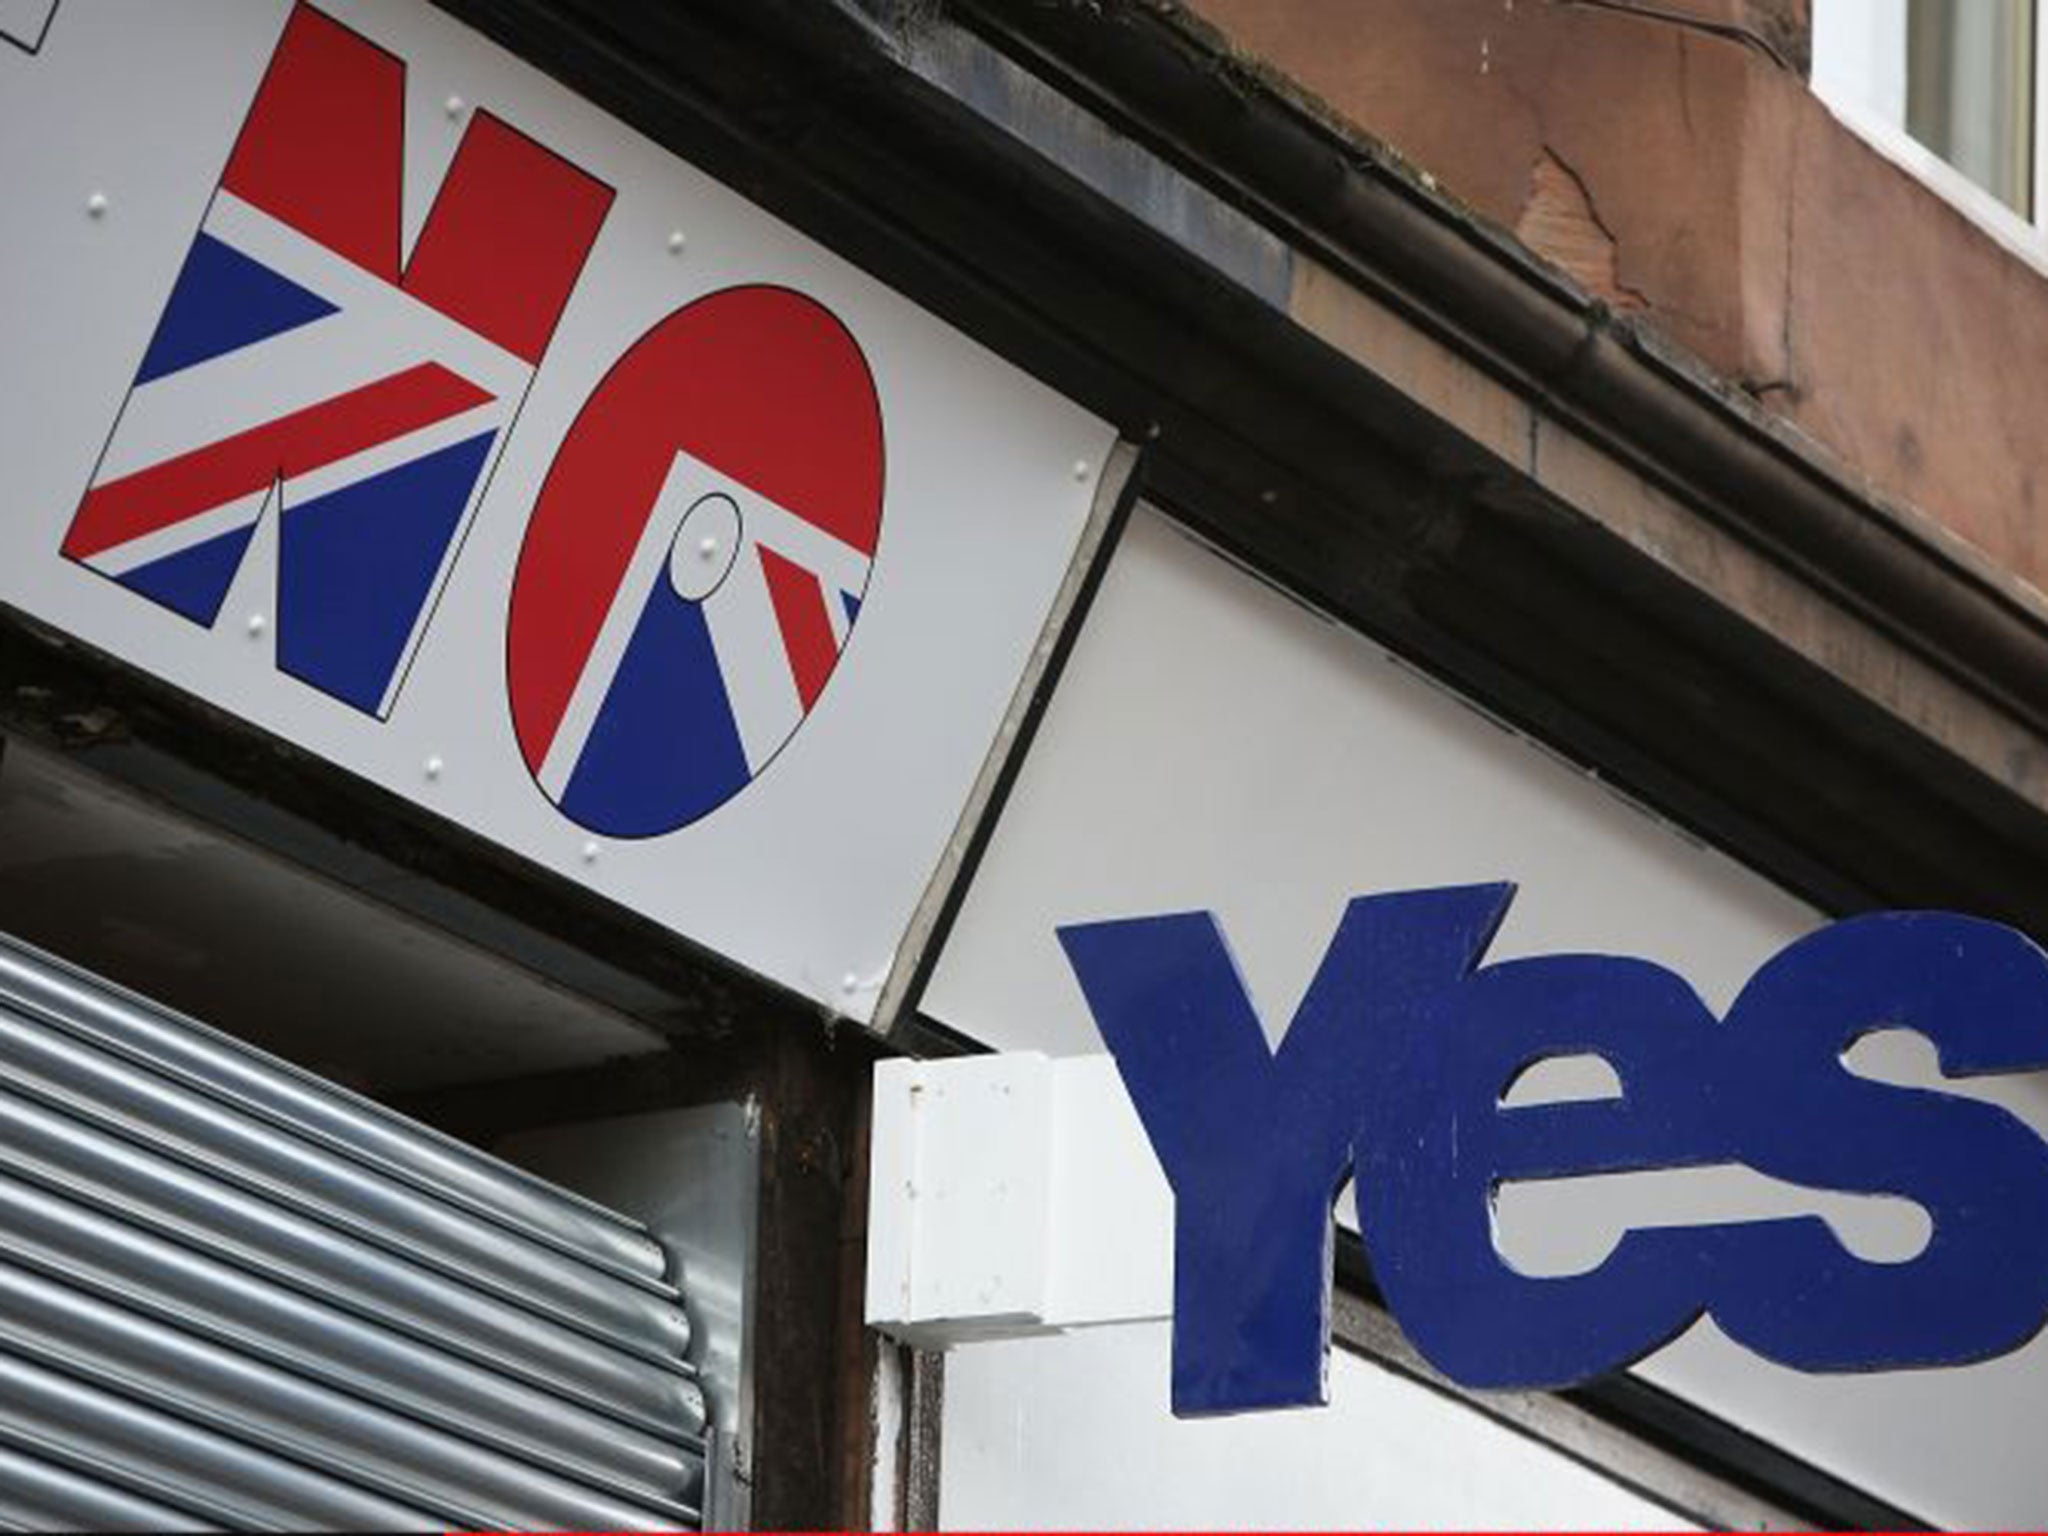 Political viewpoints decorate the exterior of premises in Glasgow